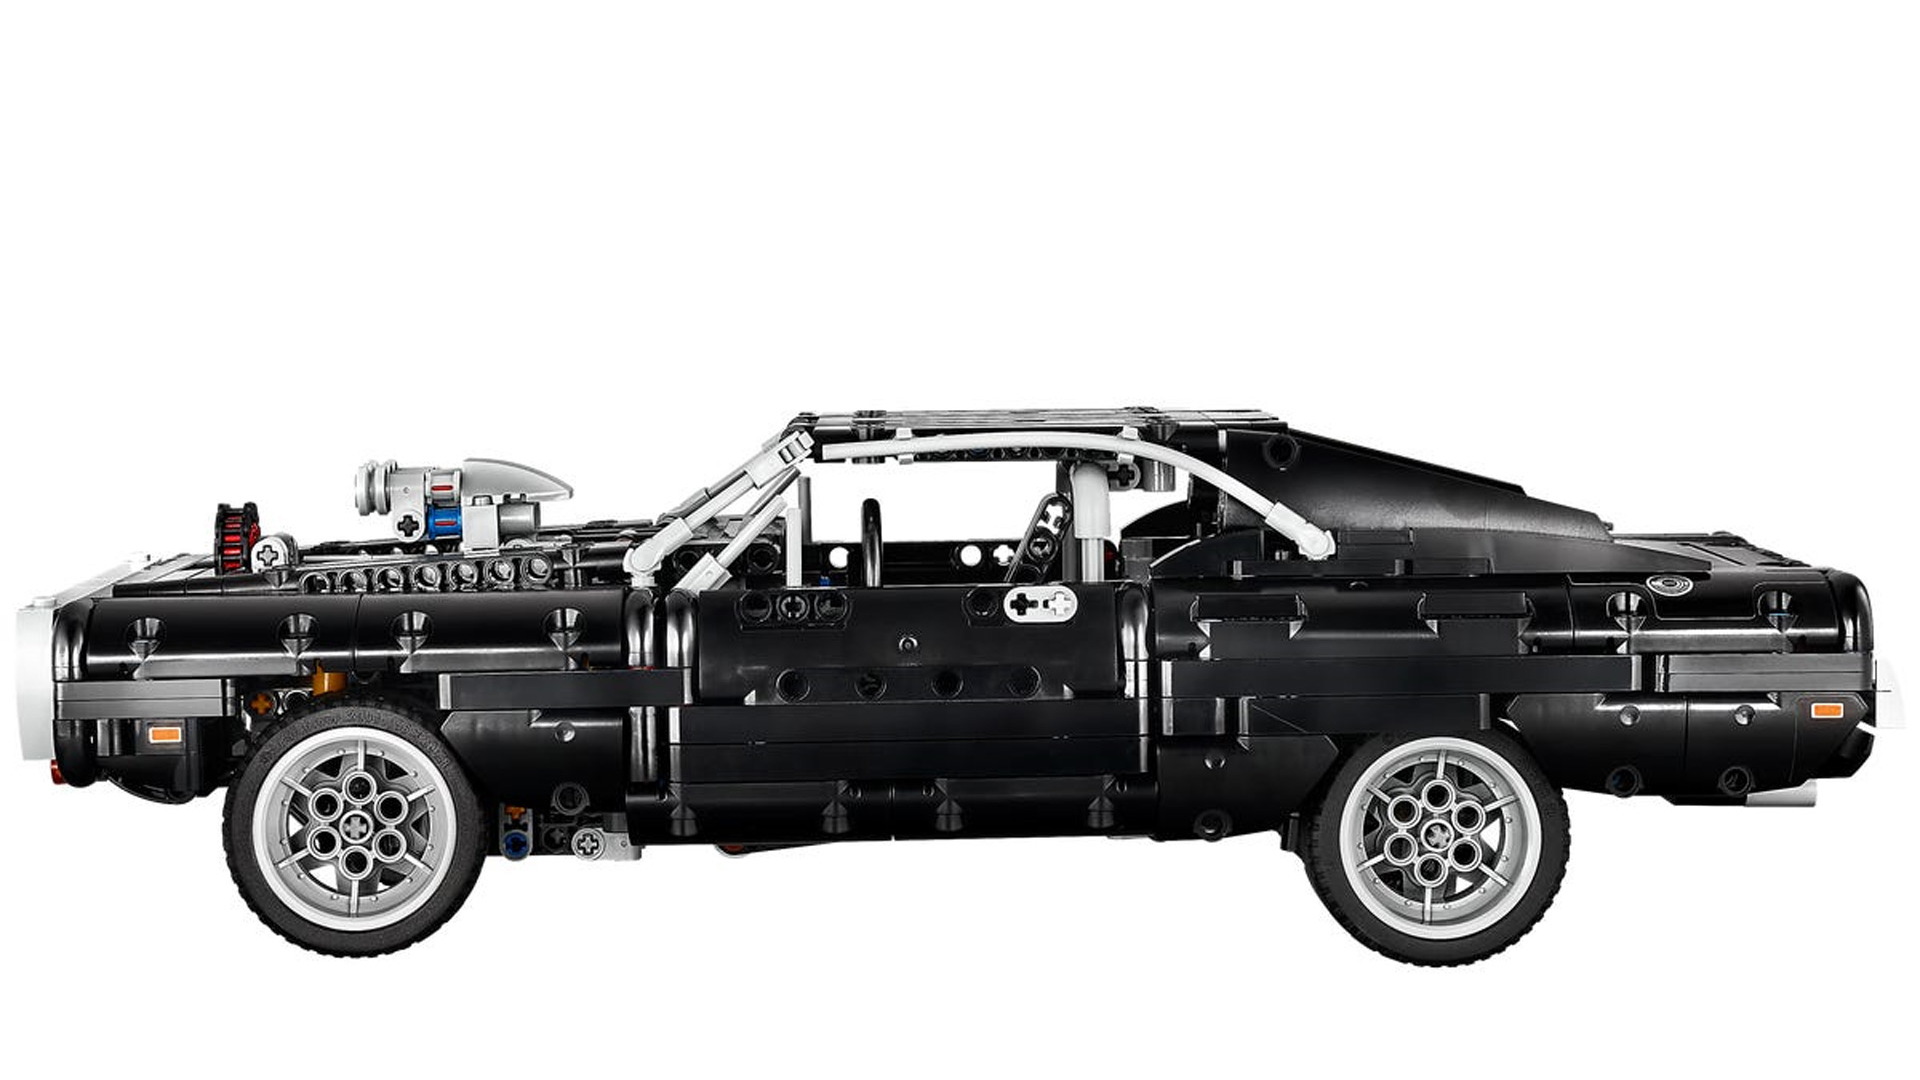 Dom's Dodge Charger - Lego Technic kit